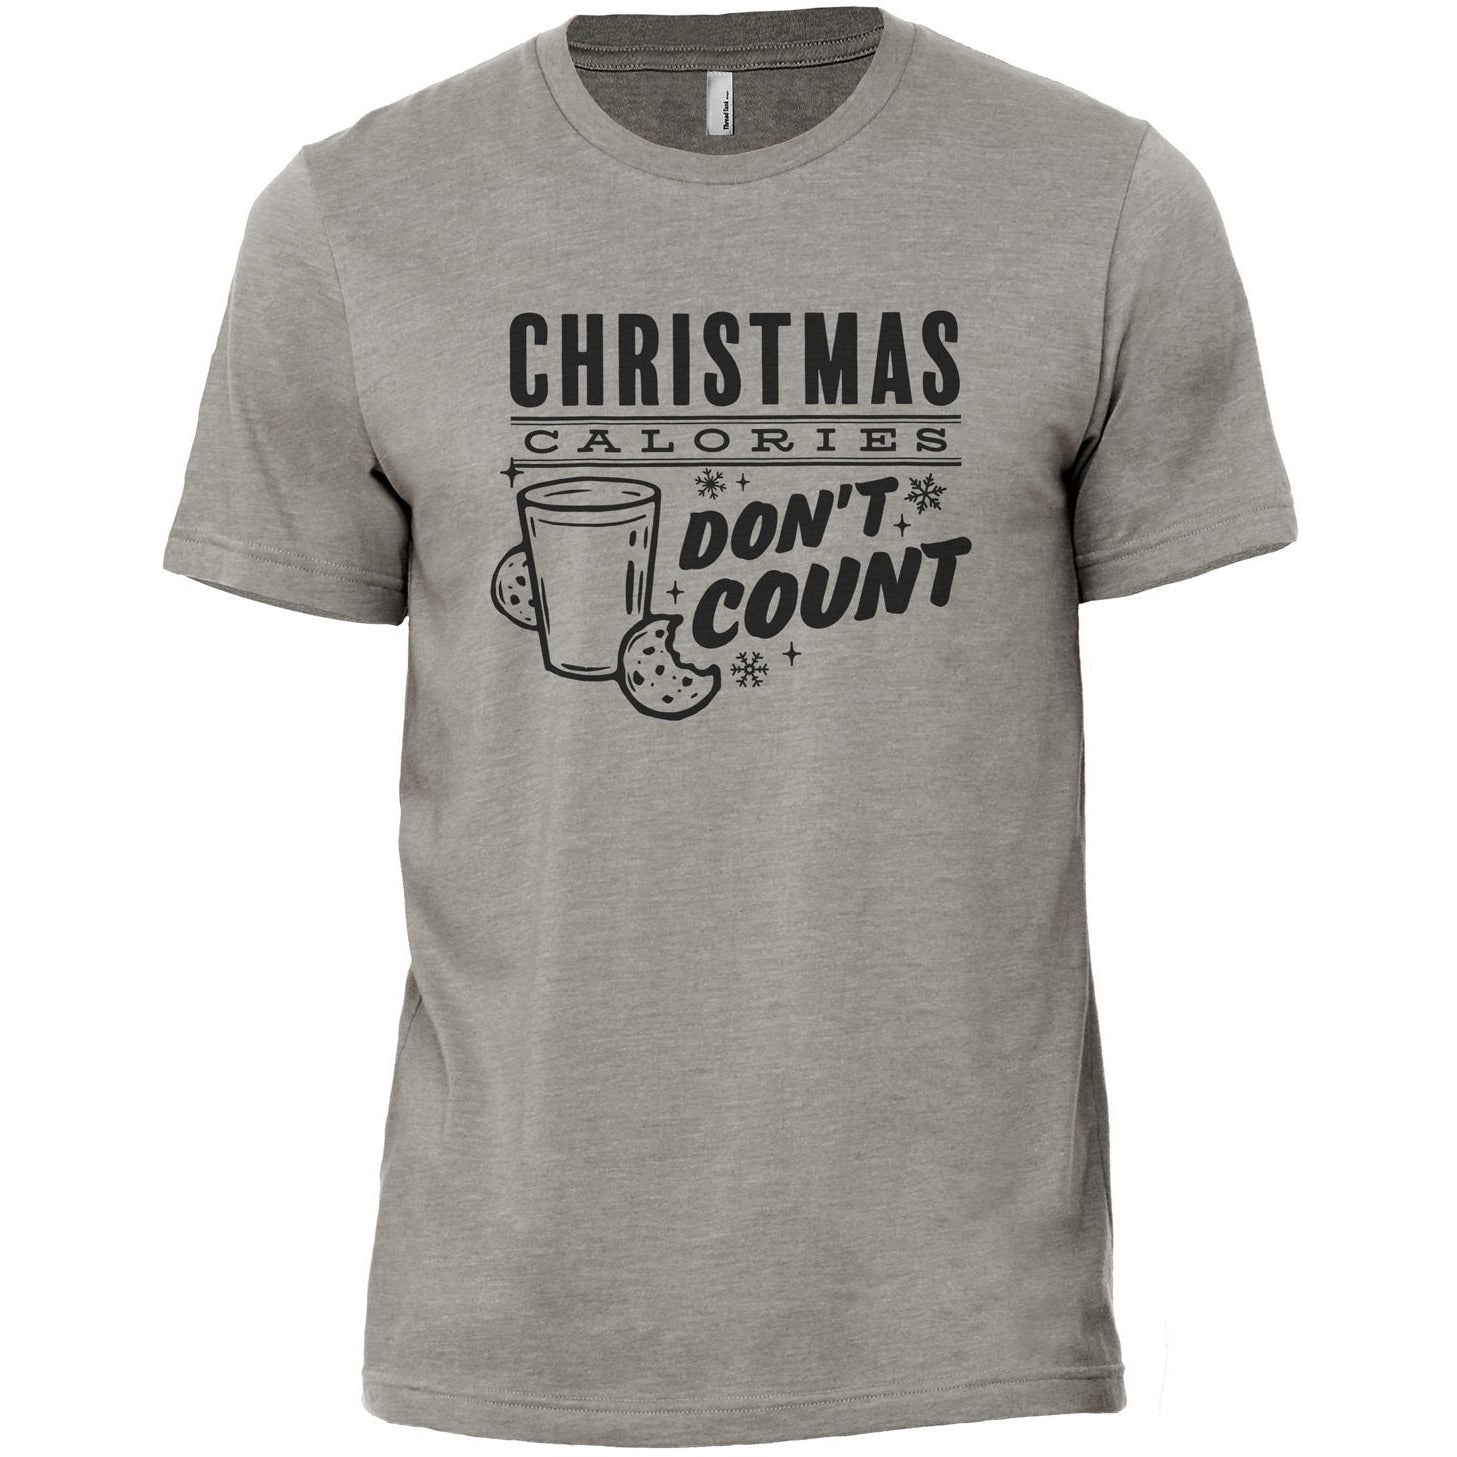 Christmas Calories Don't Count Military Grey Printed Graphic Men's Crew T-Shirt Tee